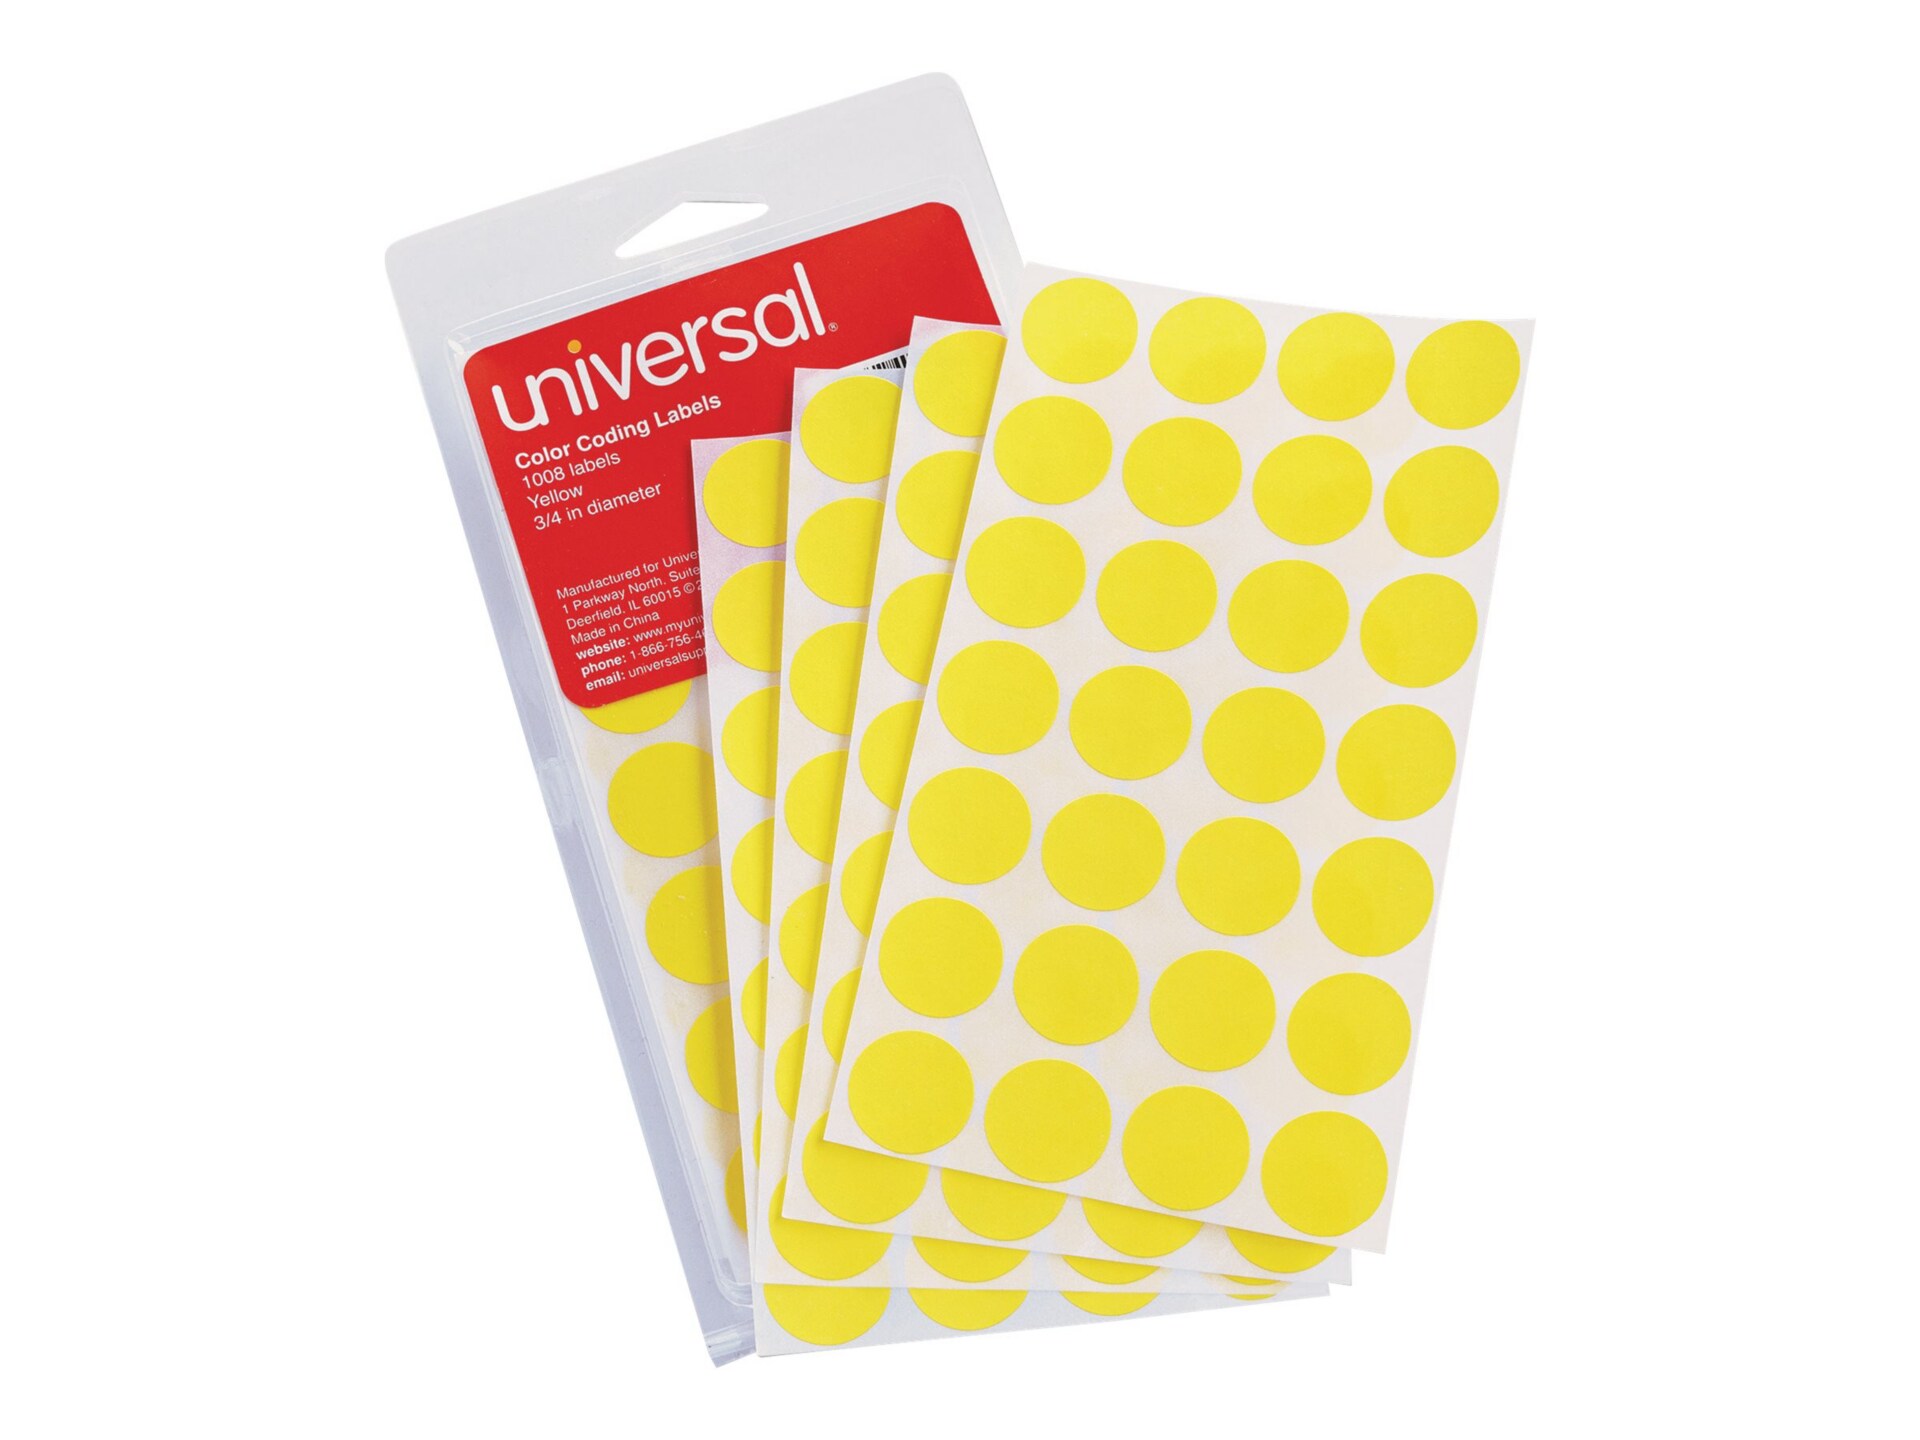 Universal - color-coded labels - 1008 label(s) - 0.7 in round